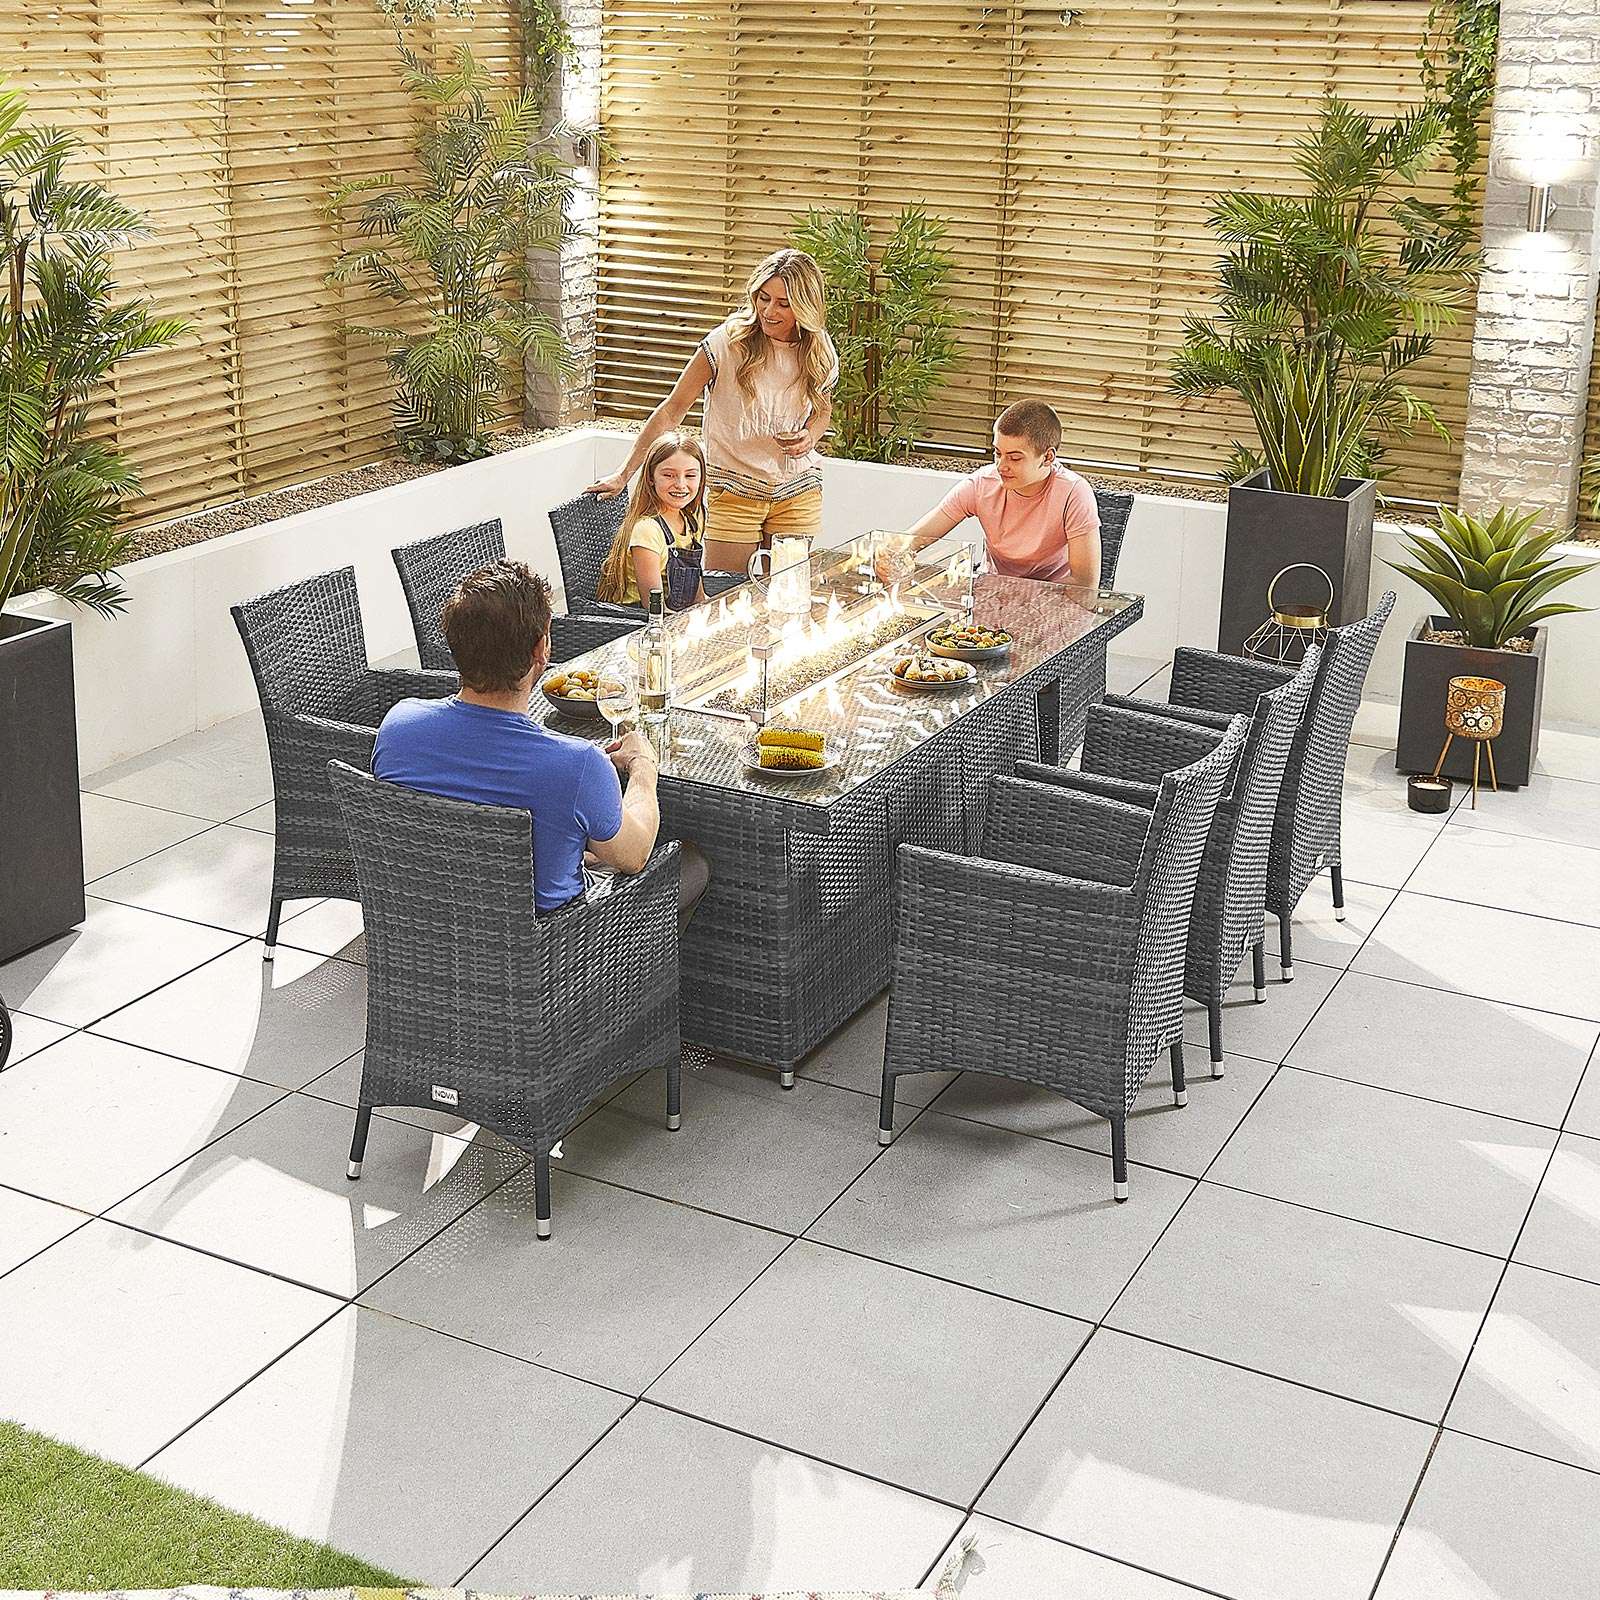 Amelia 8 Seat Dining Set with Fire Pit   2m x 1m Rectangular Table   Grey